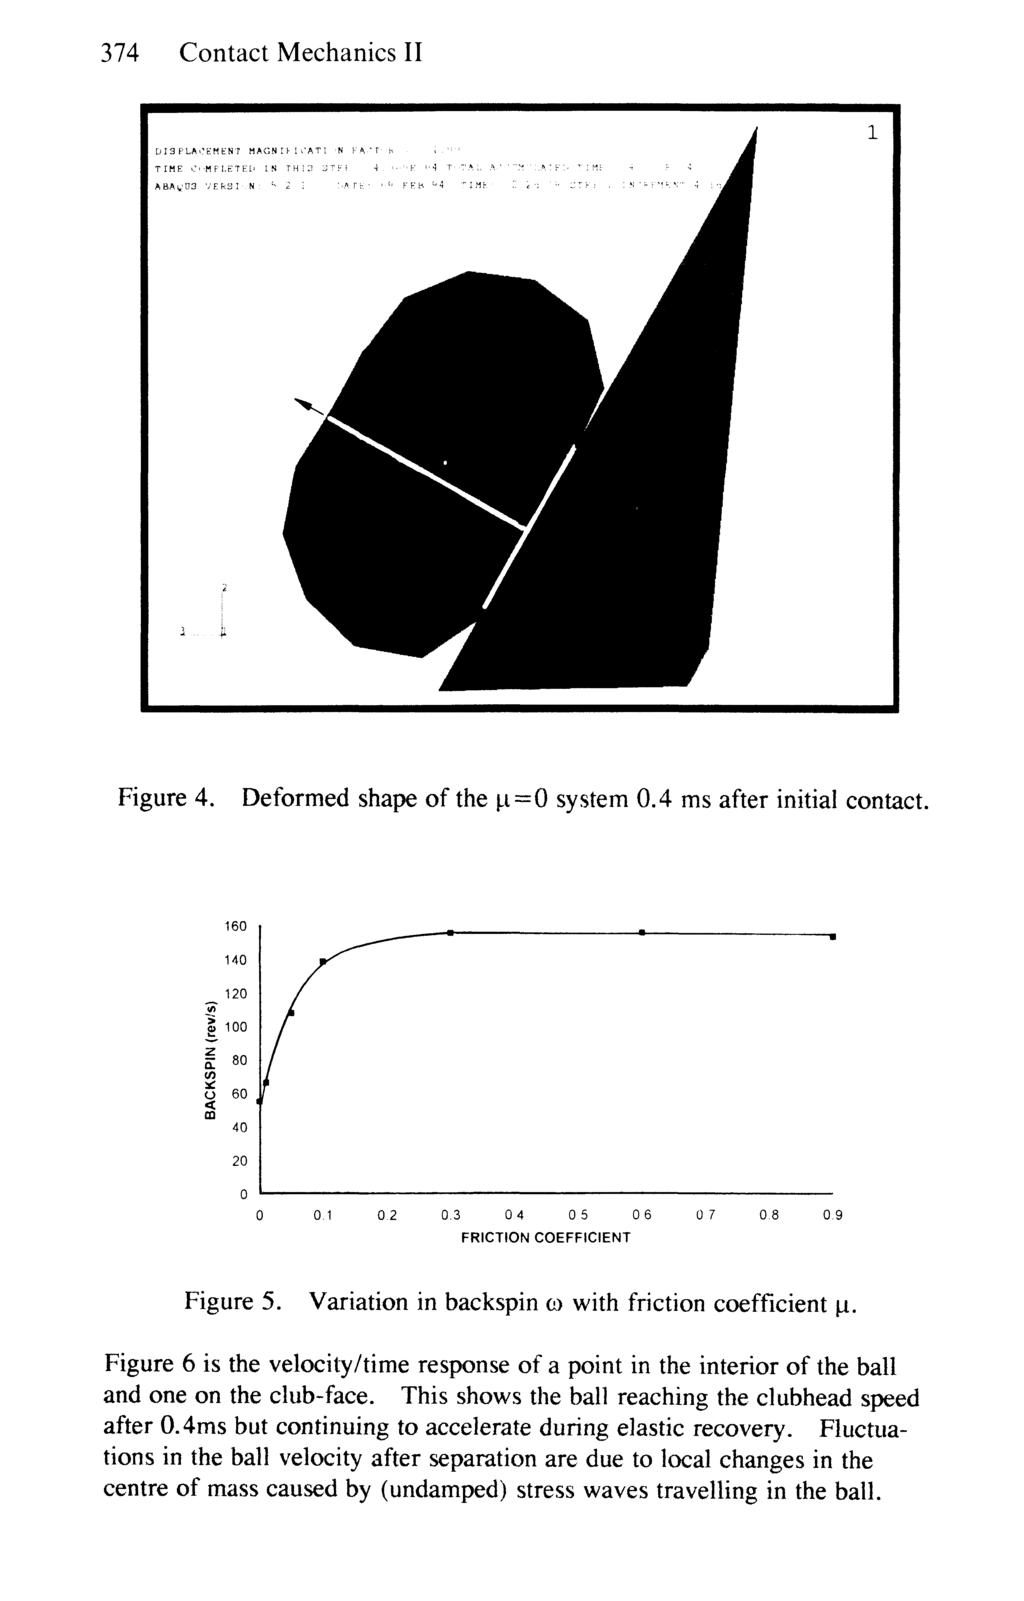 374 Contact Mechanics II Figure 4. Deformed shape of the ji=0 system 0.4 ms after initial contact. 160 140 _ 120 j/» 100 1 80 (/) O 60 CO 40 20 0 0.3 0.4 05 06 FRICTION COEFFICIENT Figure 5.